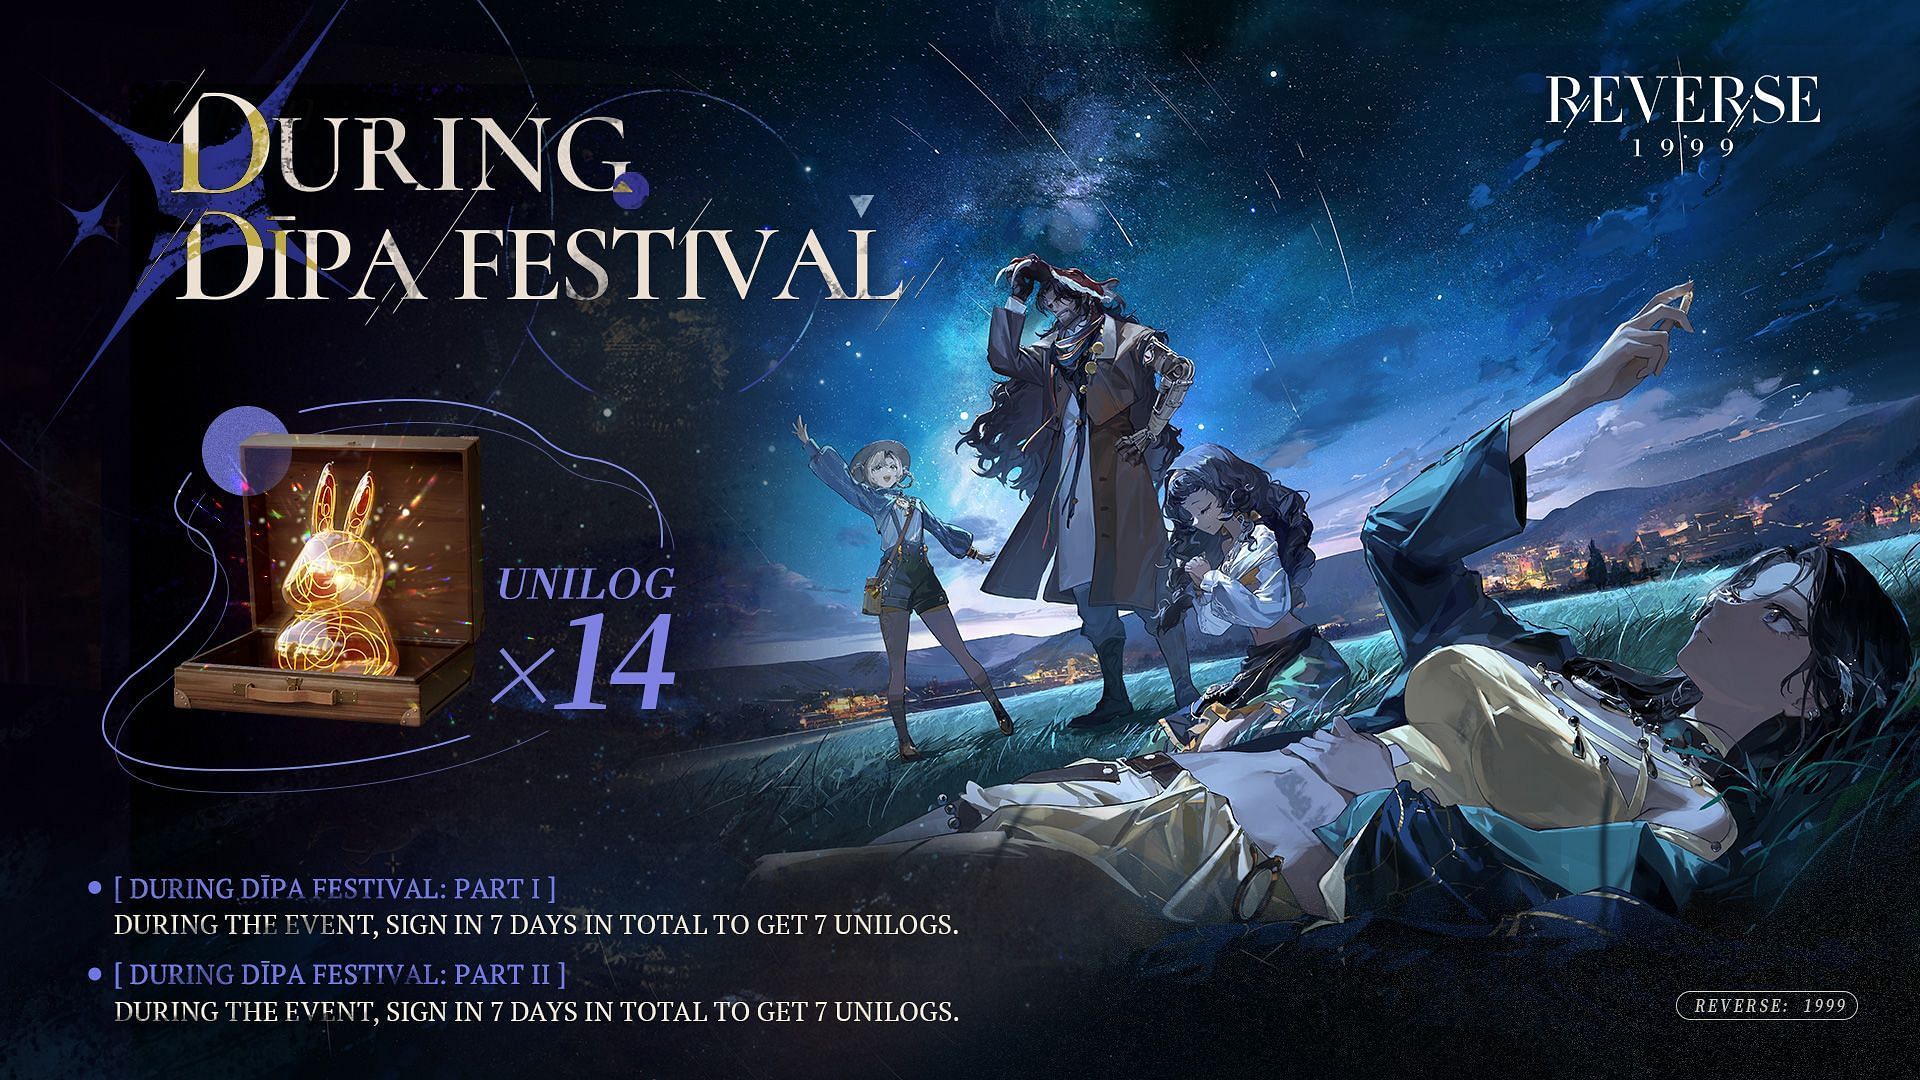 Reverse 1999 version 1.3 update brings During Dipa Festival event, which grants 14 free Unilogs. (Image via Bluepoch)